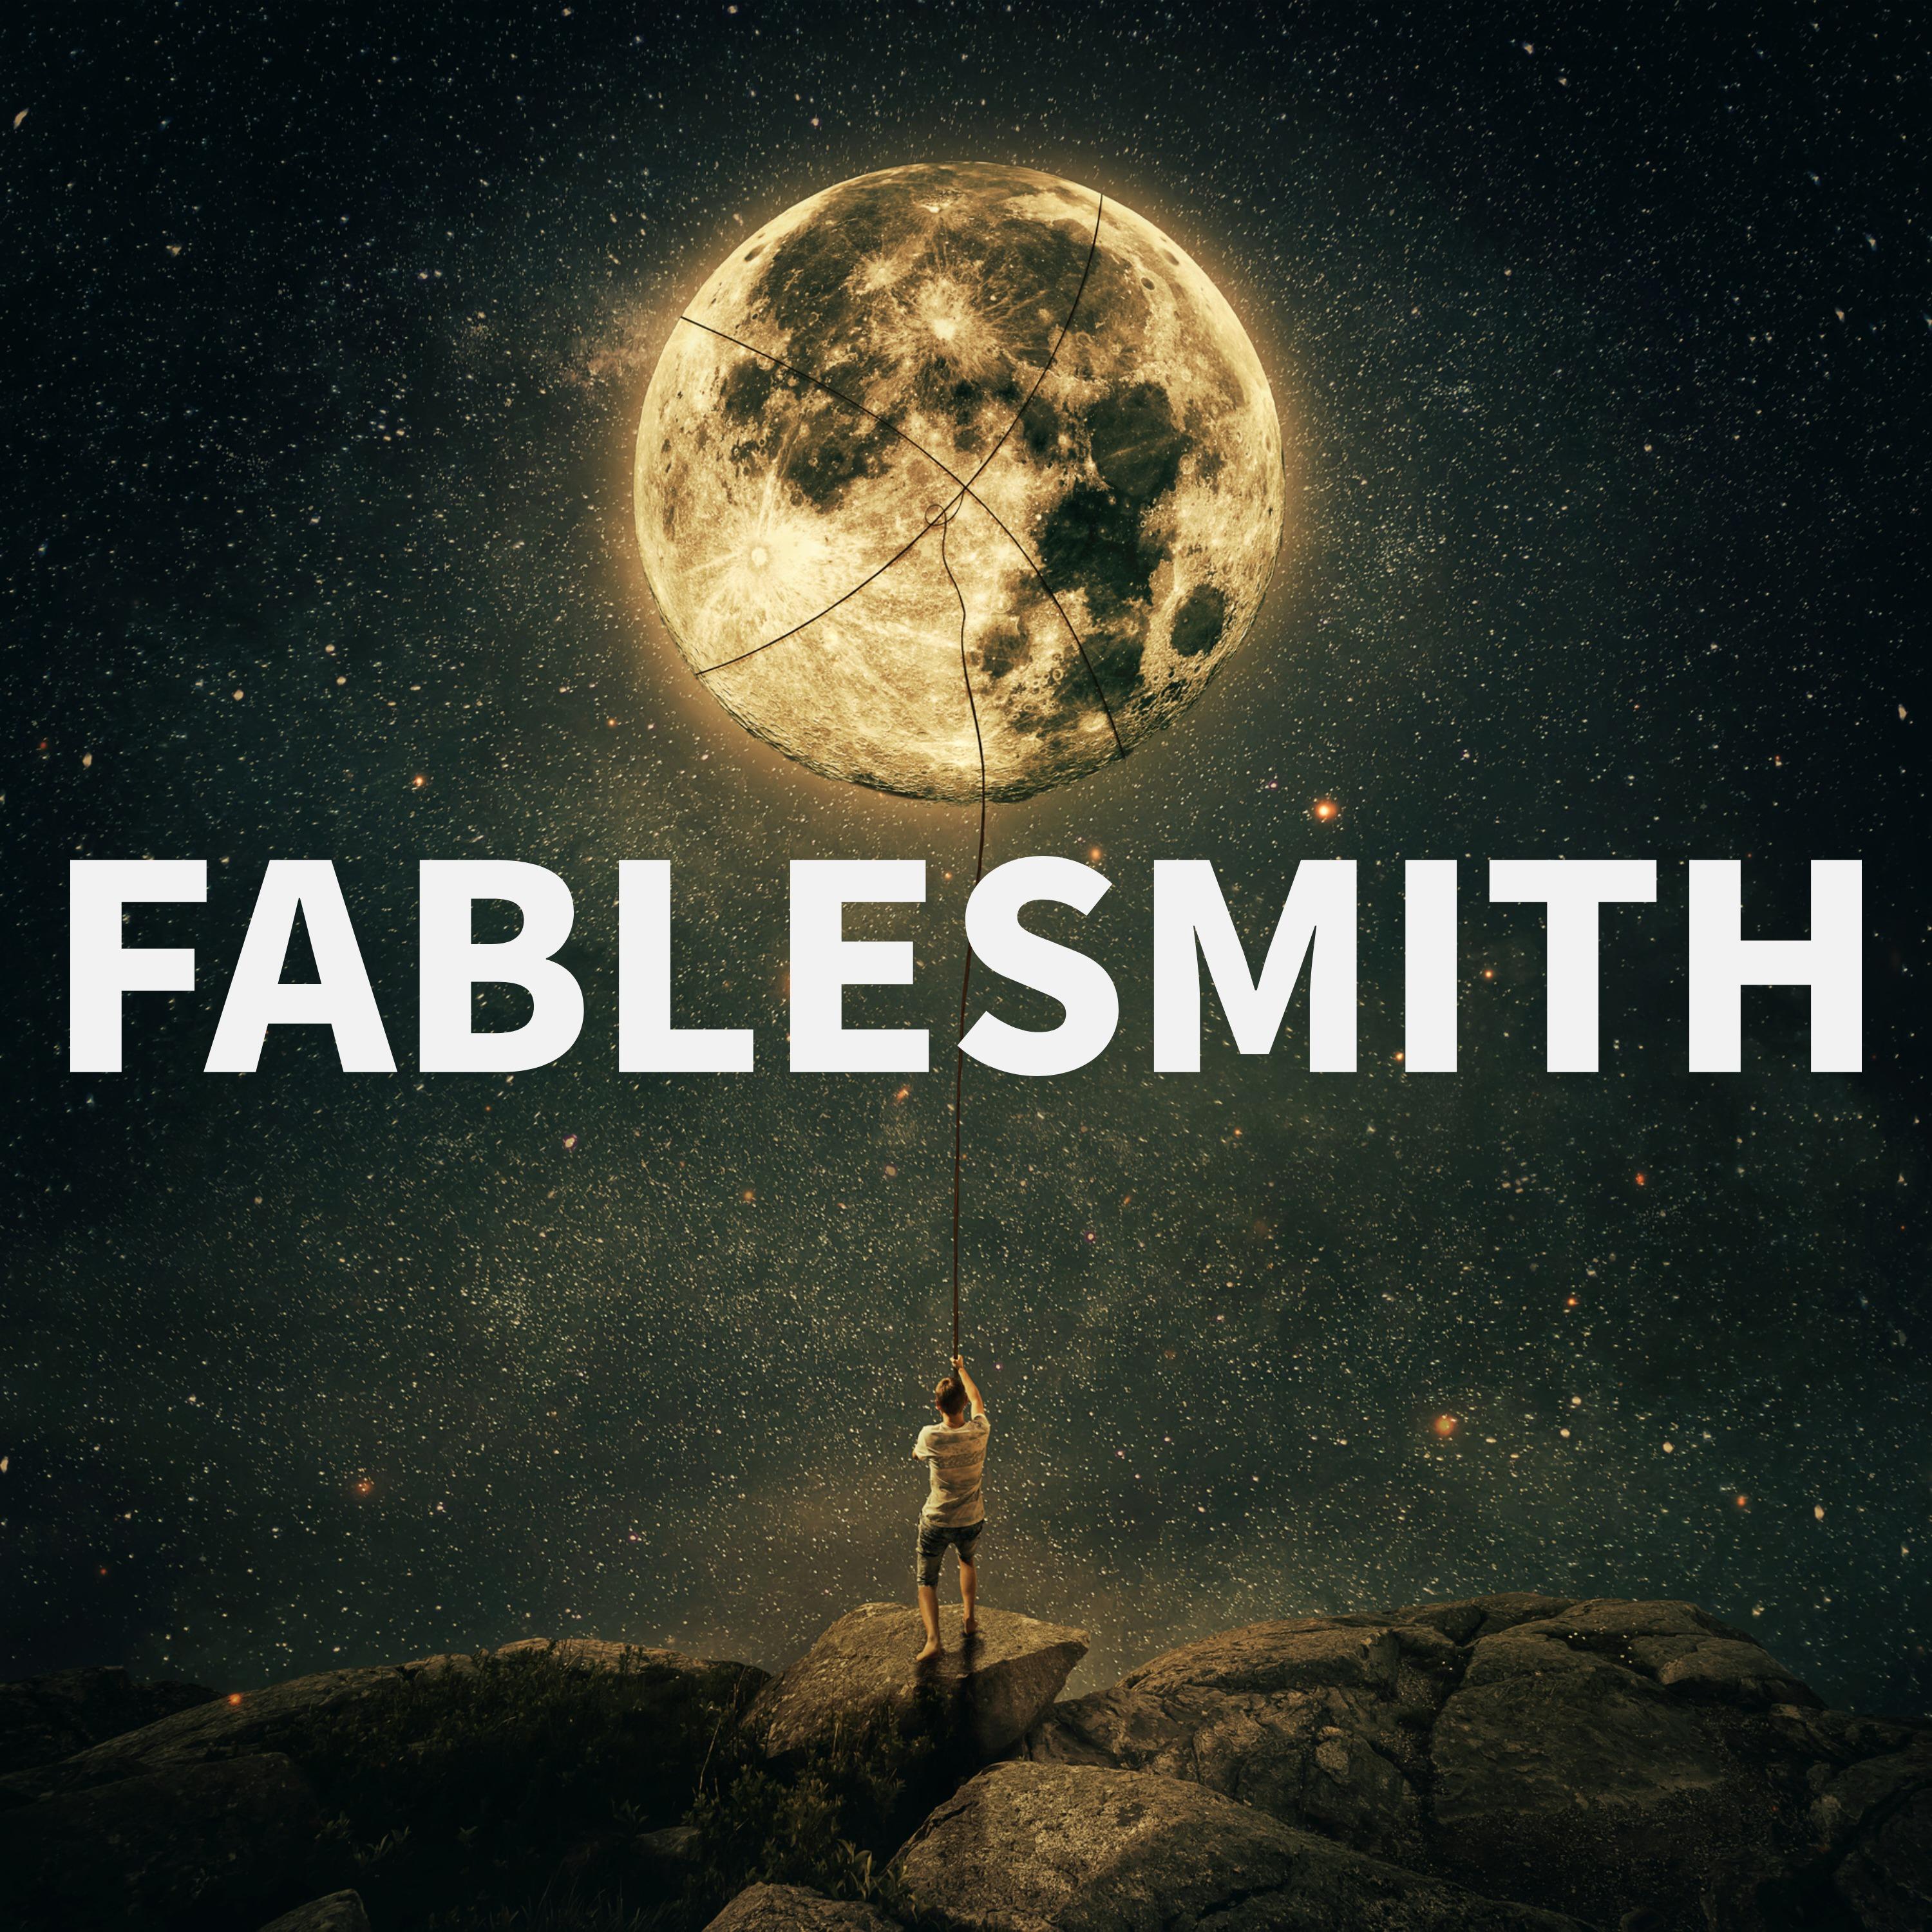 Fablesmith